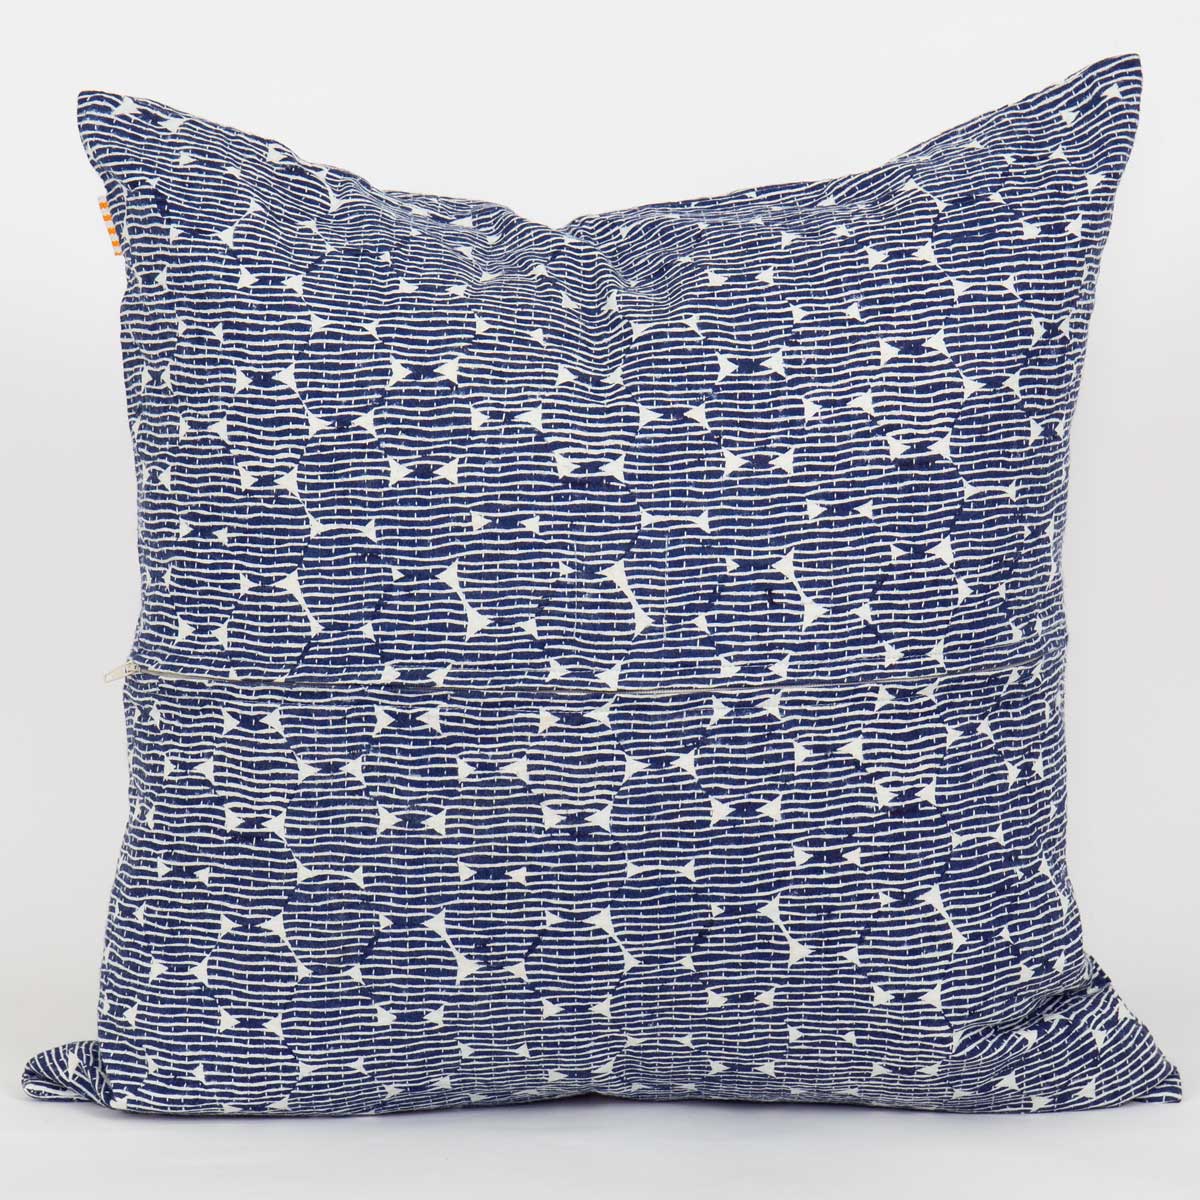 ROUNDS Cushion cover 50x50, blue/white